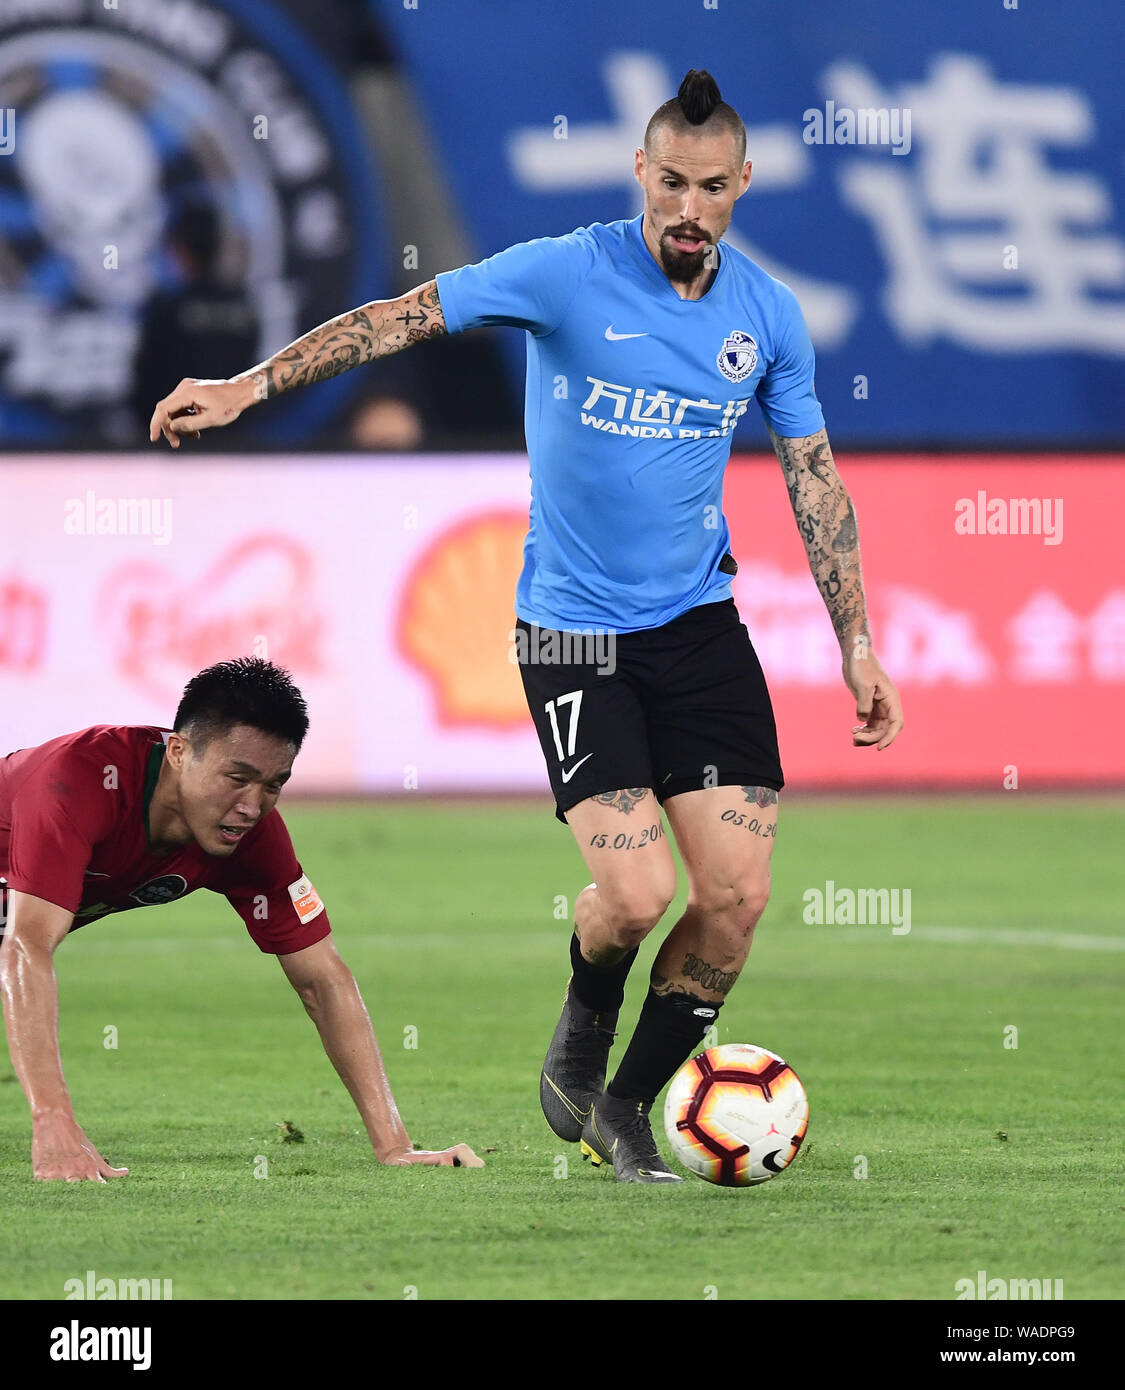 Slovak football player Marek Hamsik, right, of Dalian Yifang passes the  ball against a player of Henan Jianye in their 16th round match during the  201 Stock Photo - Alamy